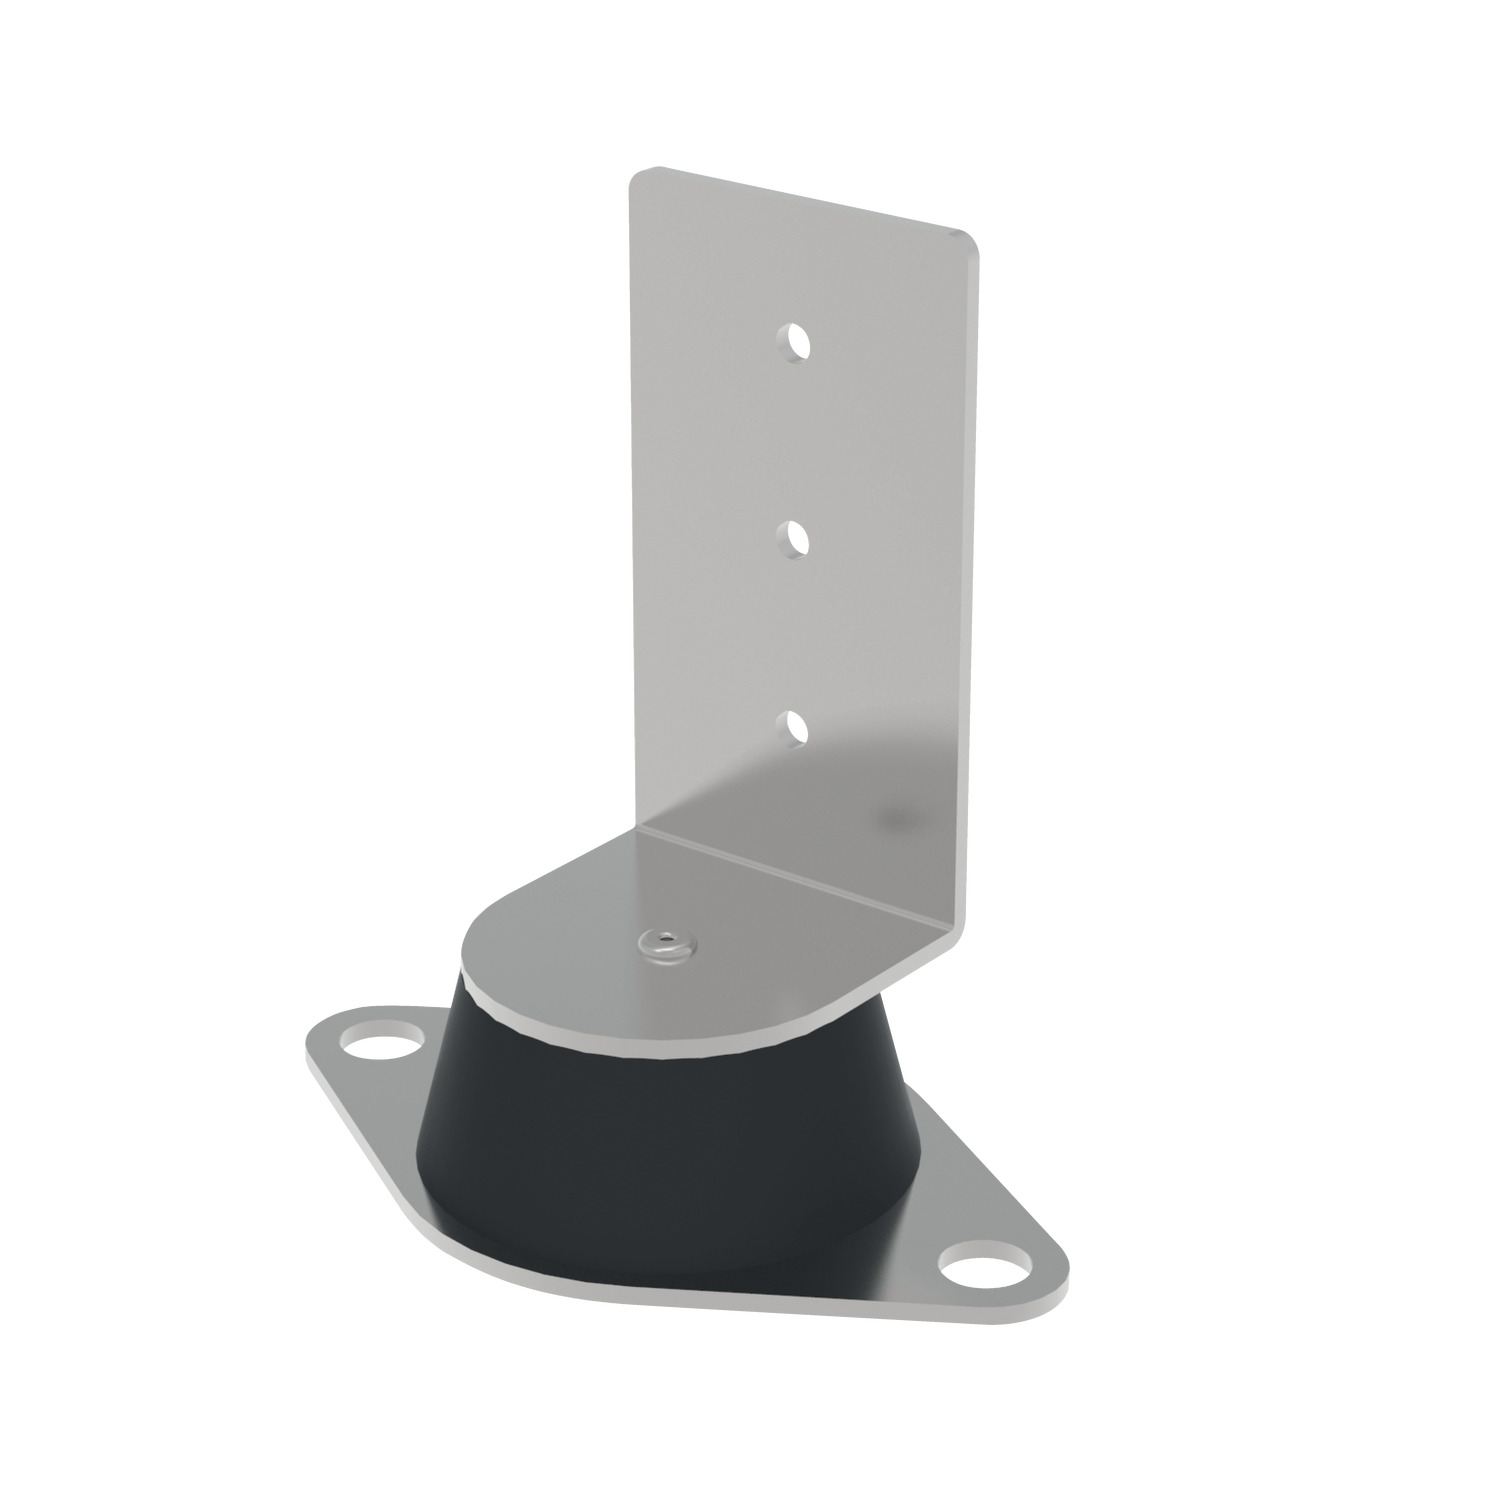 61936 - Acoustic Wall Damper right angle fixing